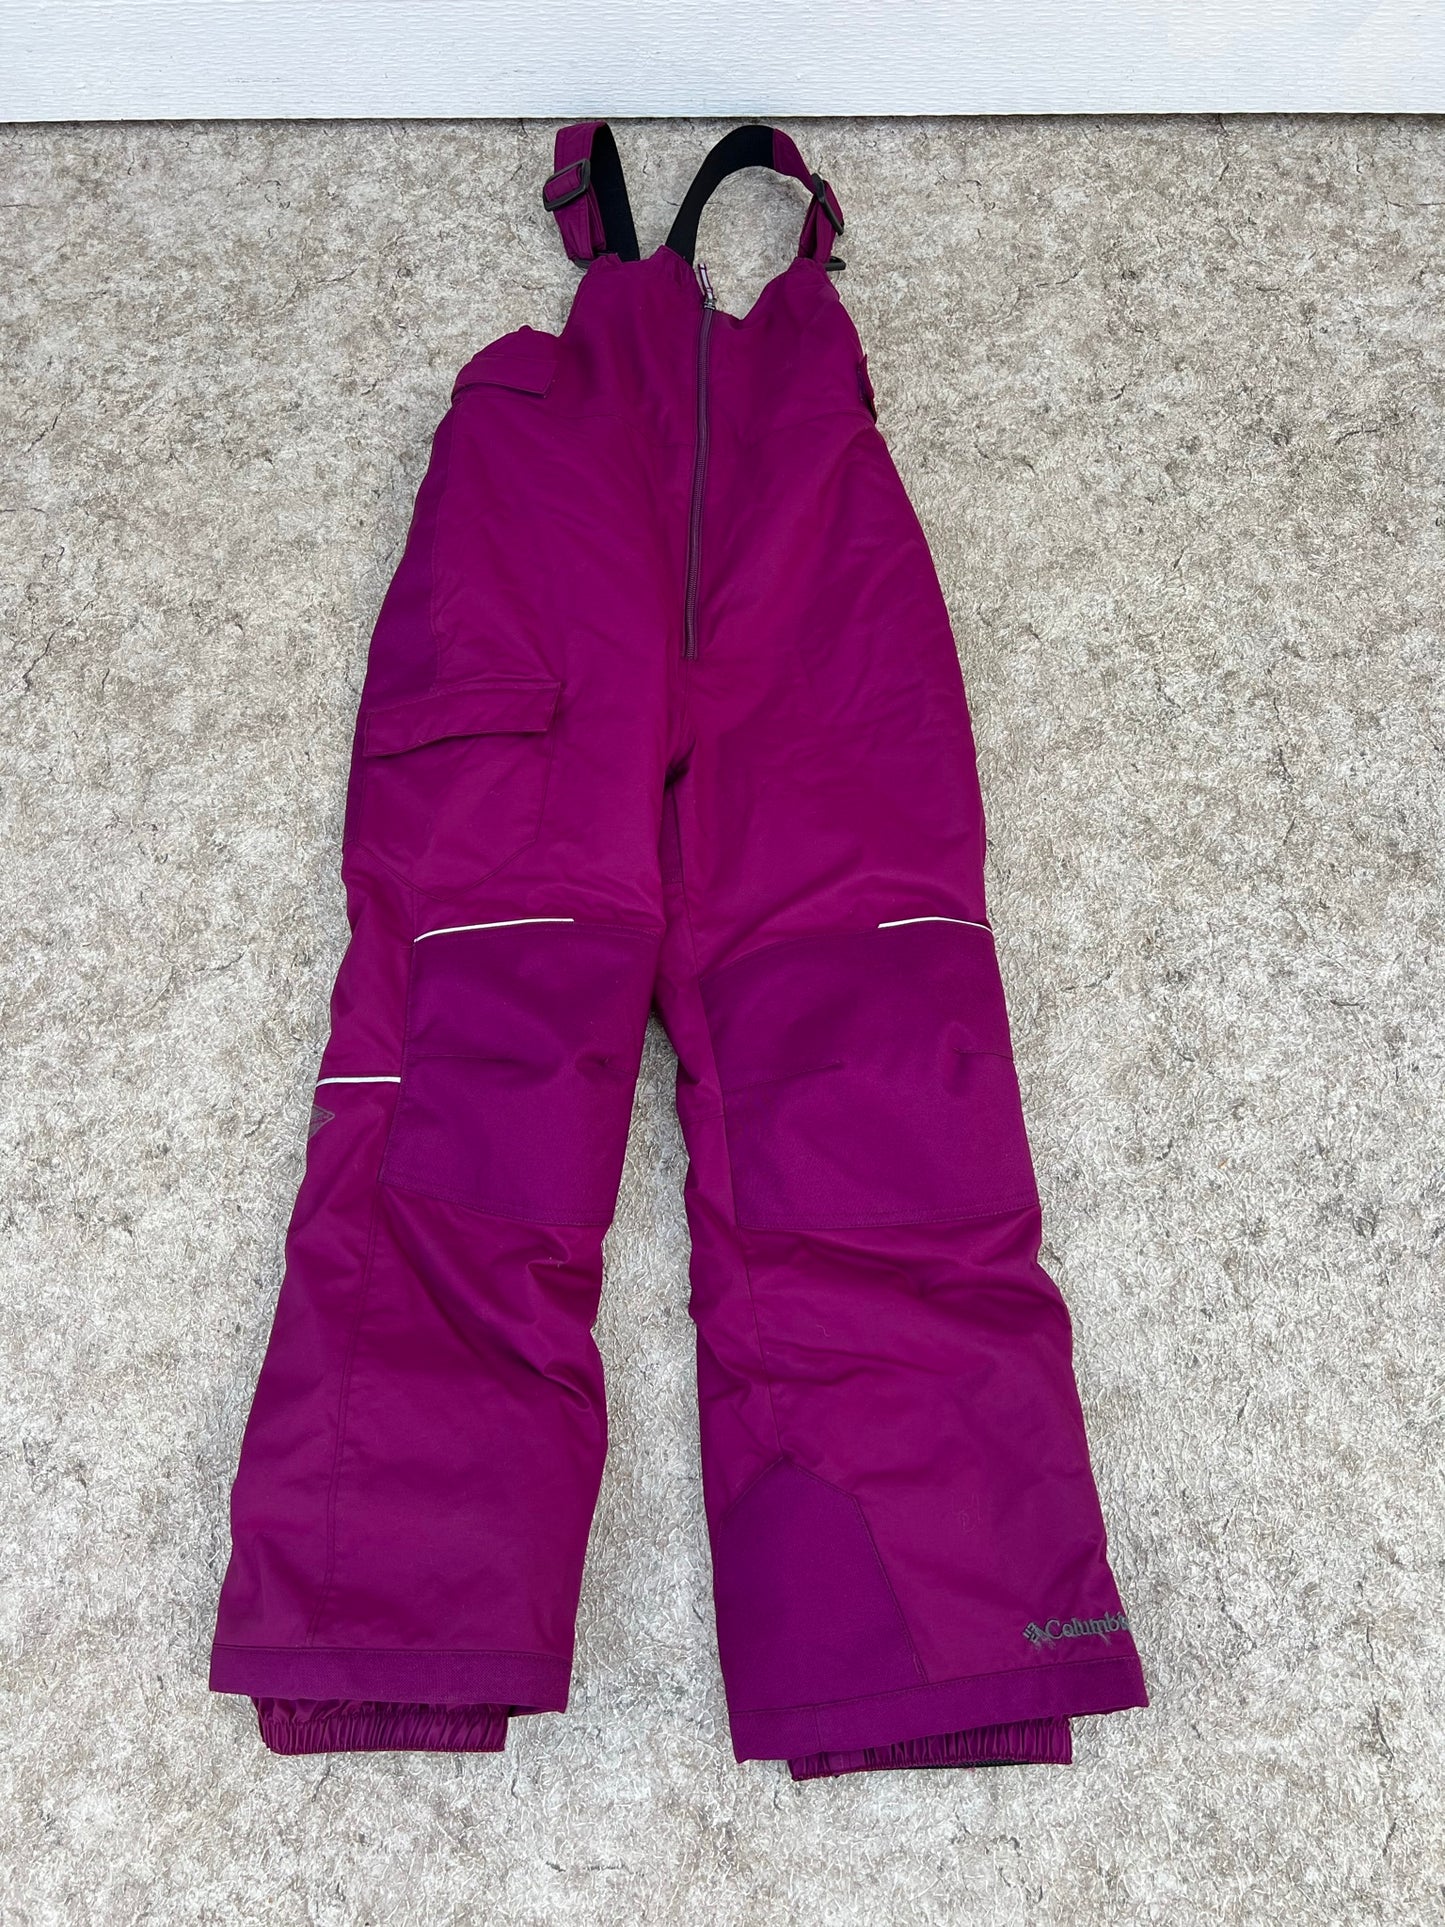 Snow Pants Child Size 10-12 Columbia With Bib Grape As New